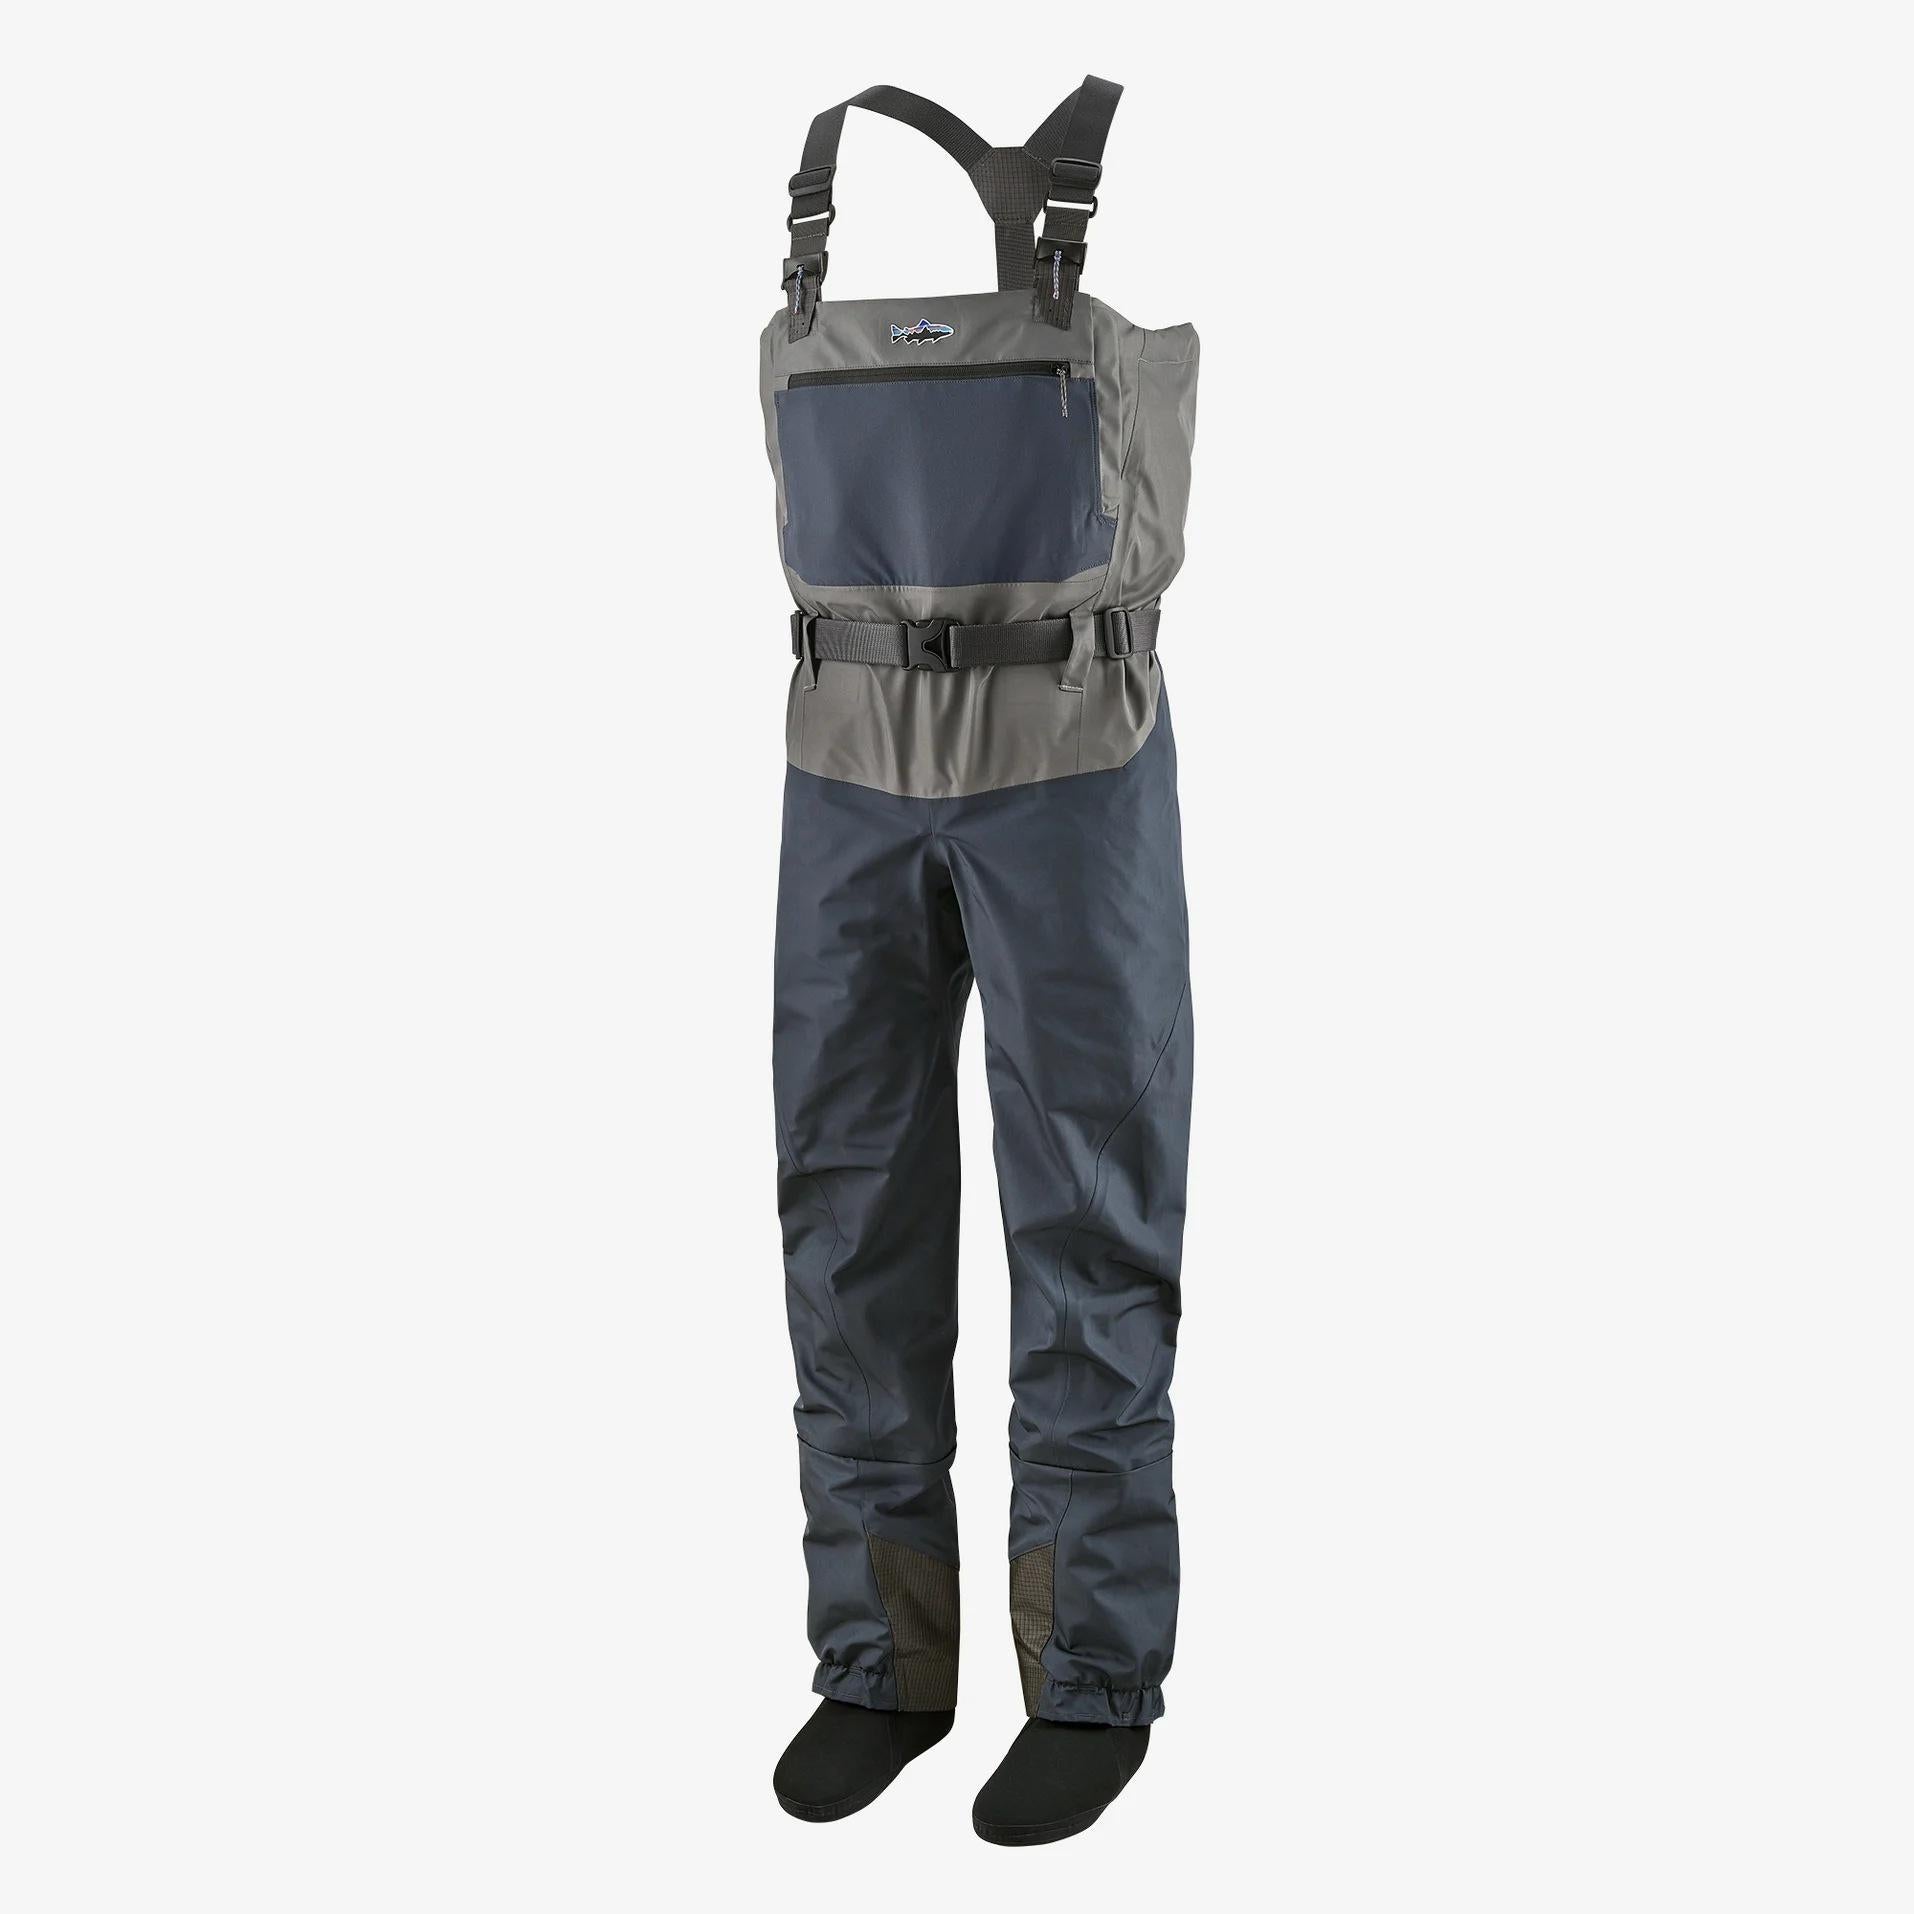 Patagonia M's Swiftcurrent Waders - Conejos River Anglers